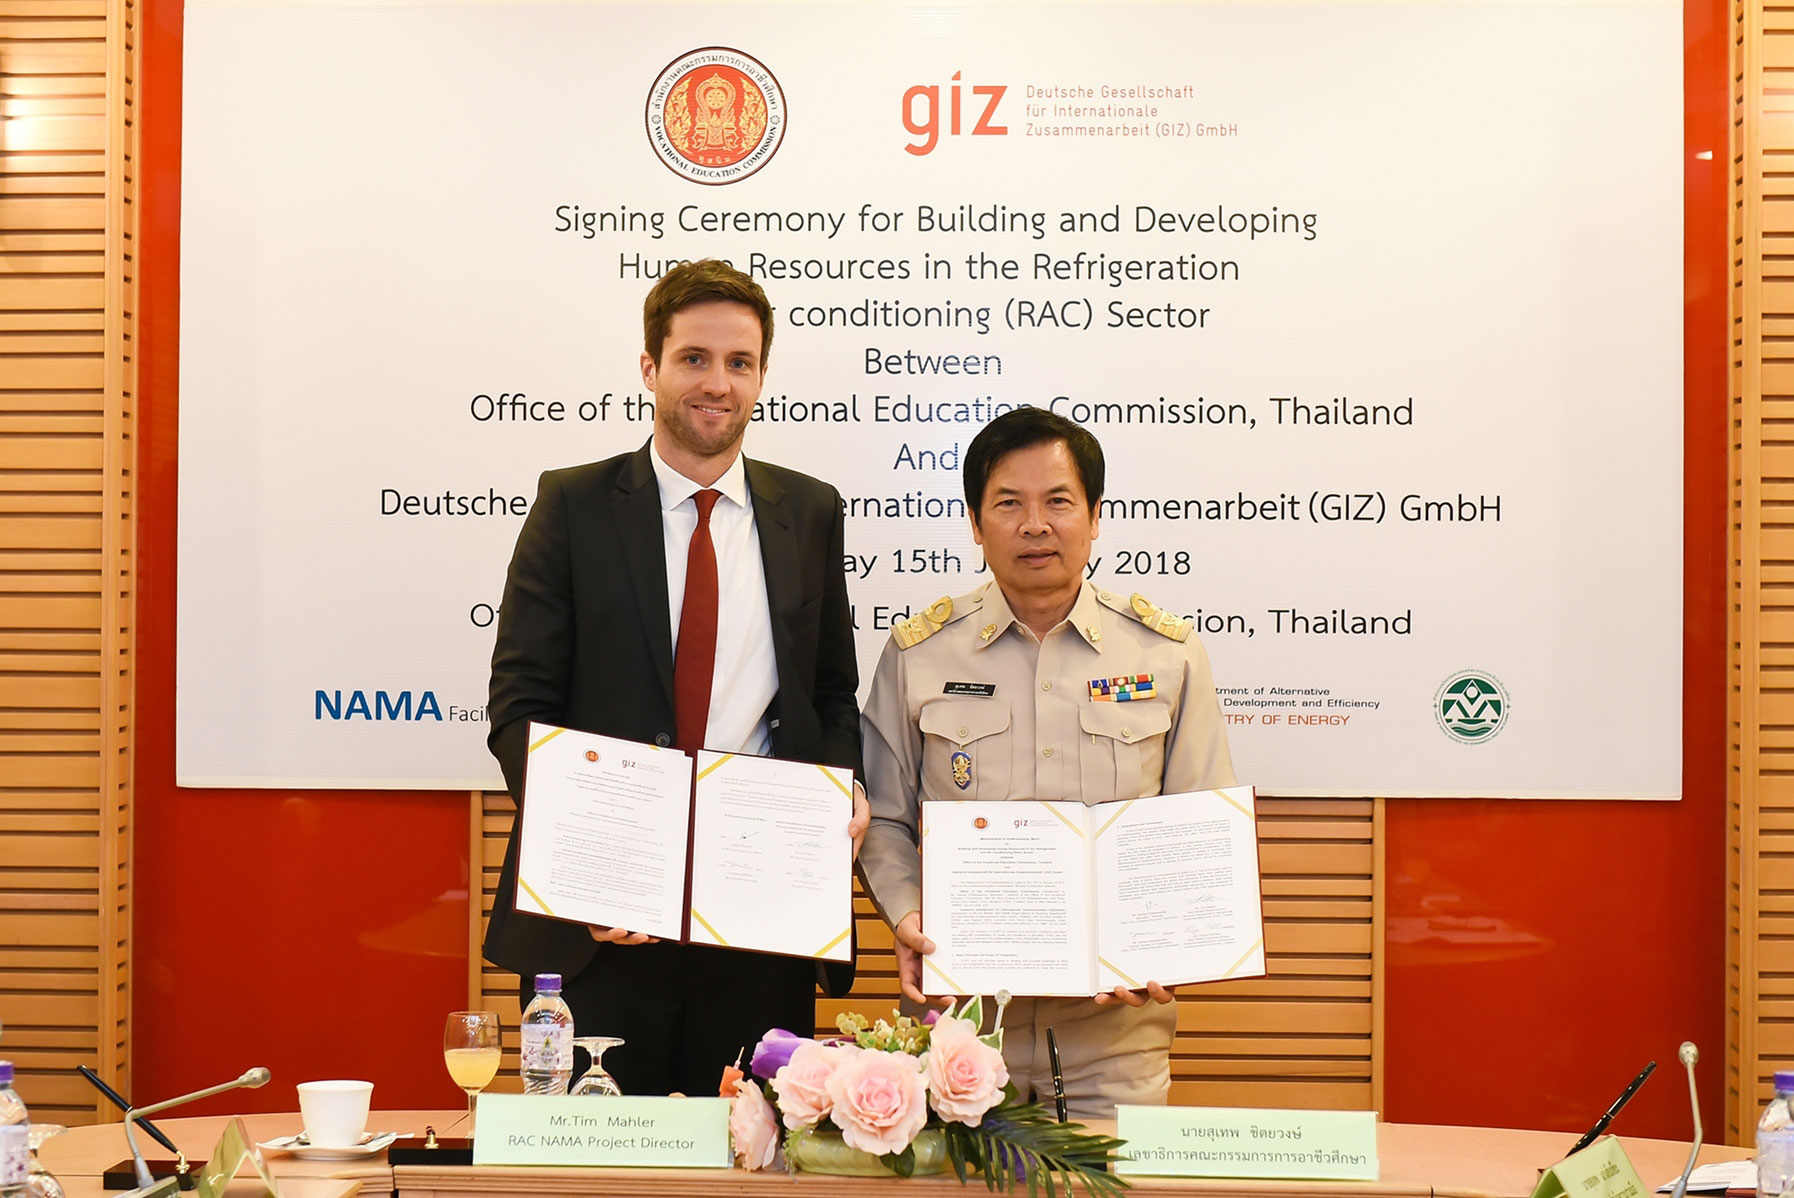 OVEC and GIZ join forces to prepare Thailand for the use of Green Cooling technology; aiming to train 2,000 service technicians by 2021